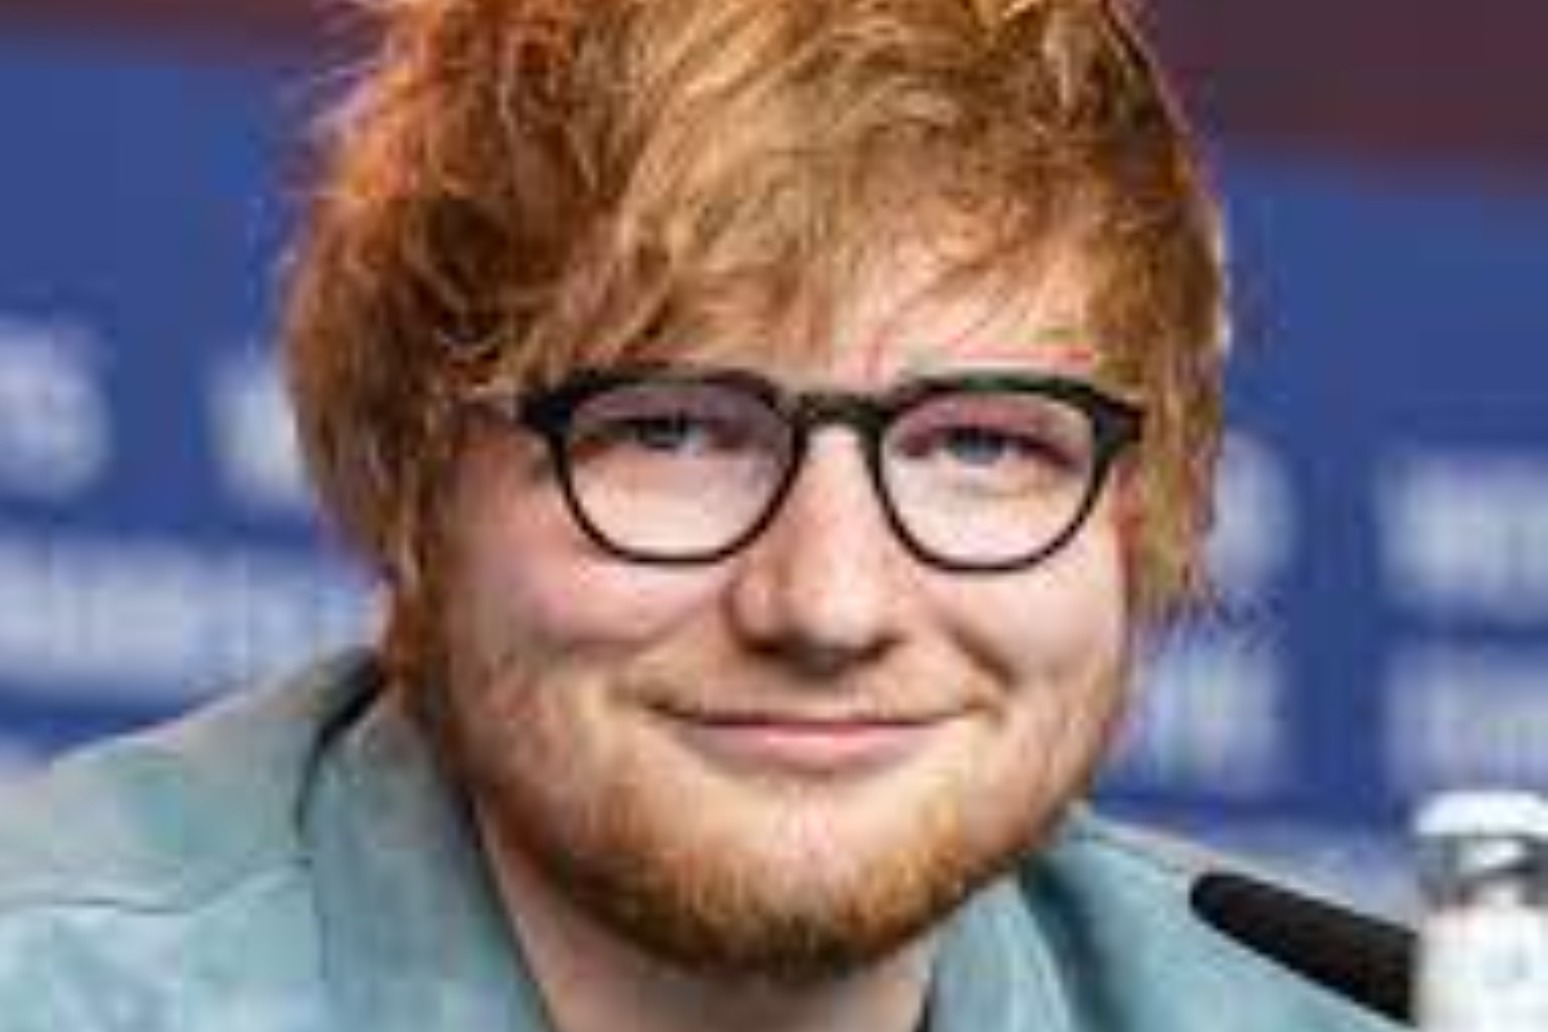 Ed Sheeran said he has tested positive for Covid-19 and is self-isolating. 